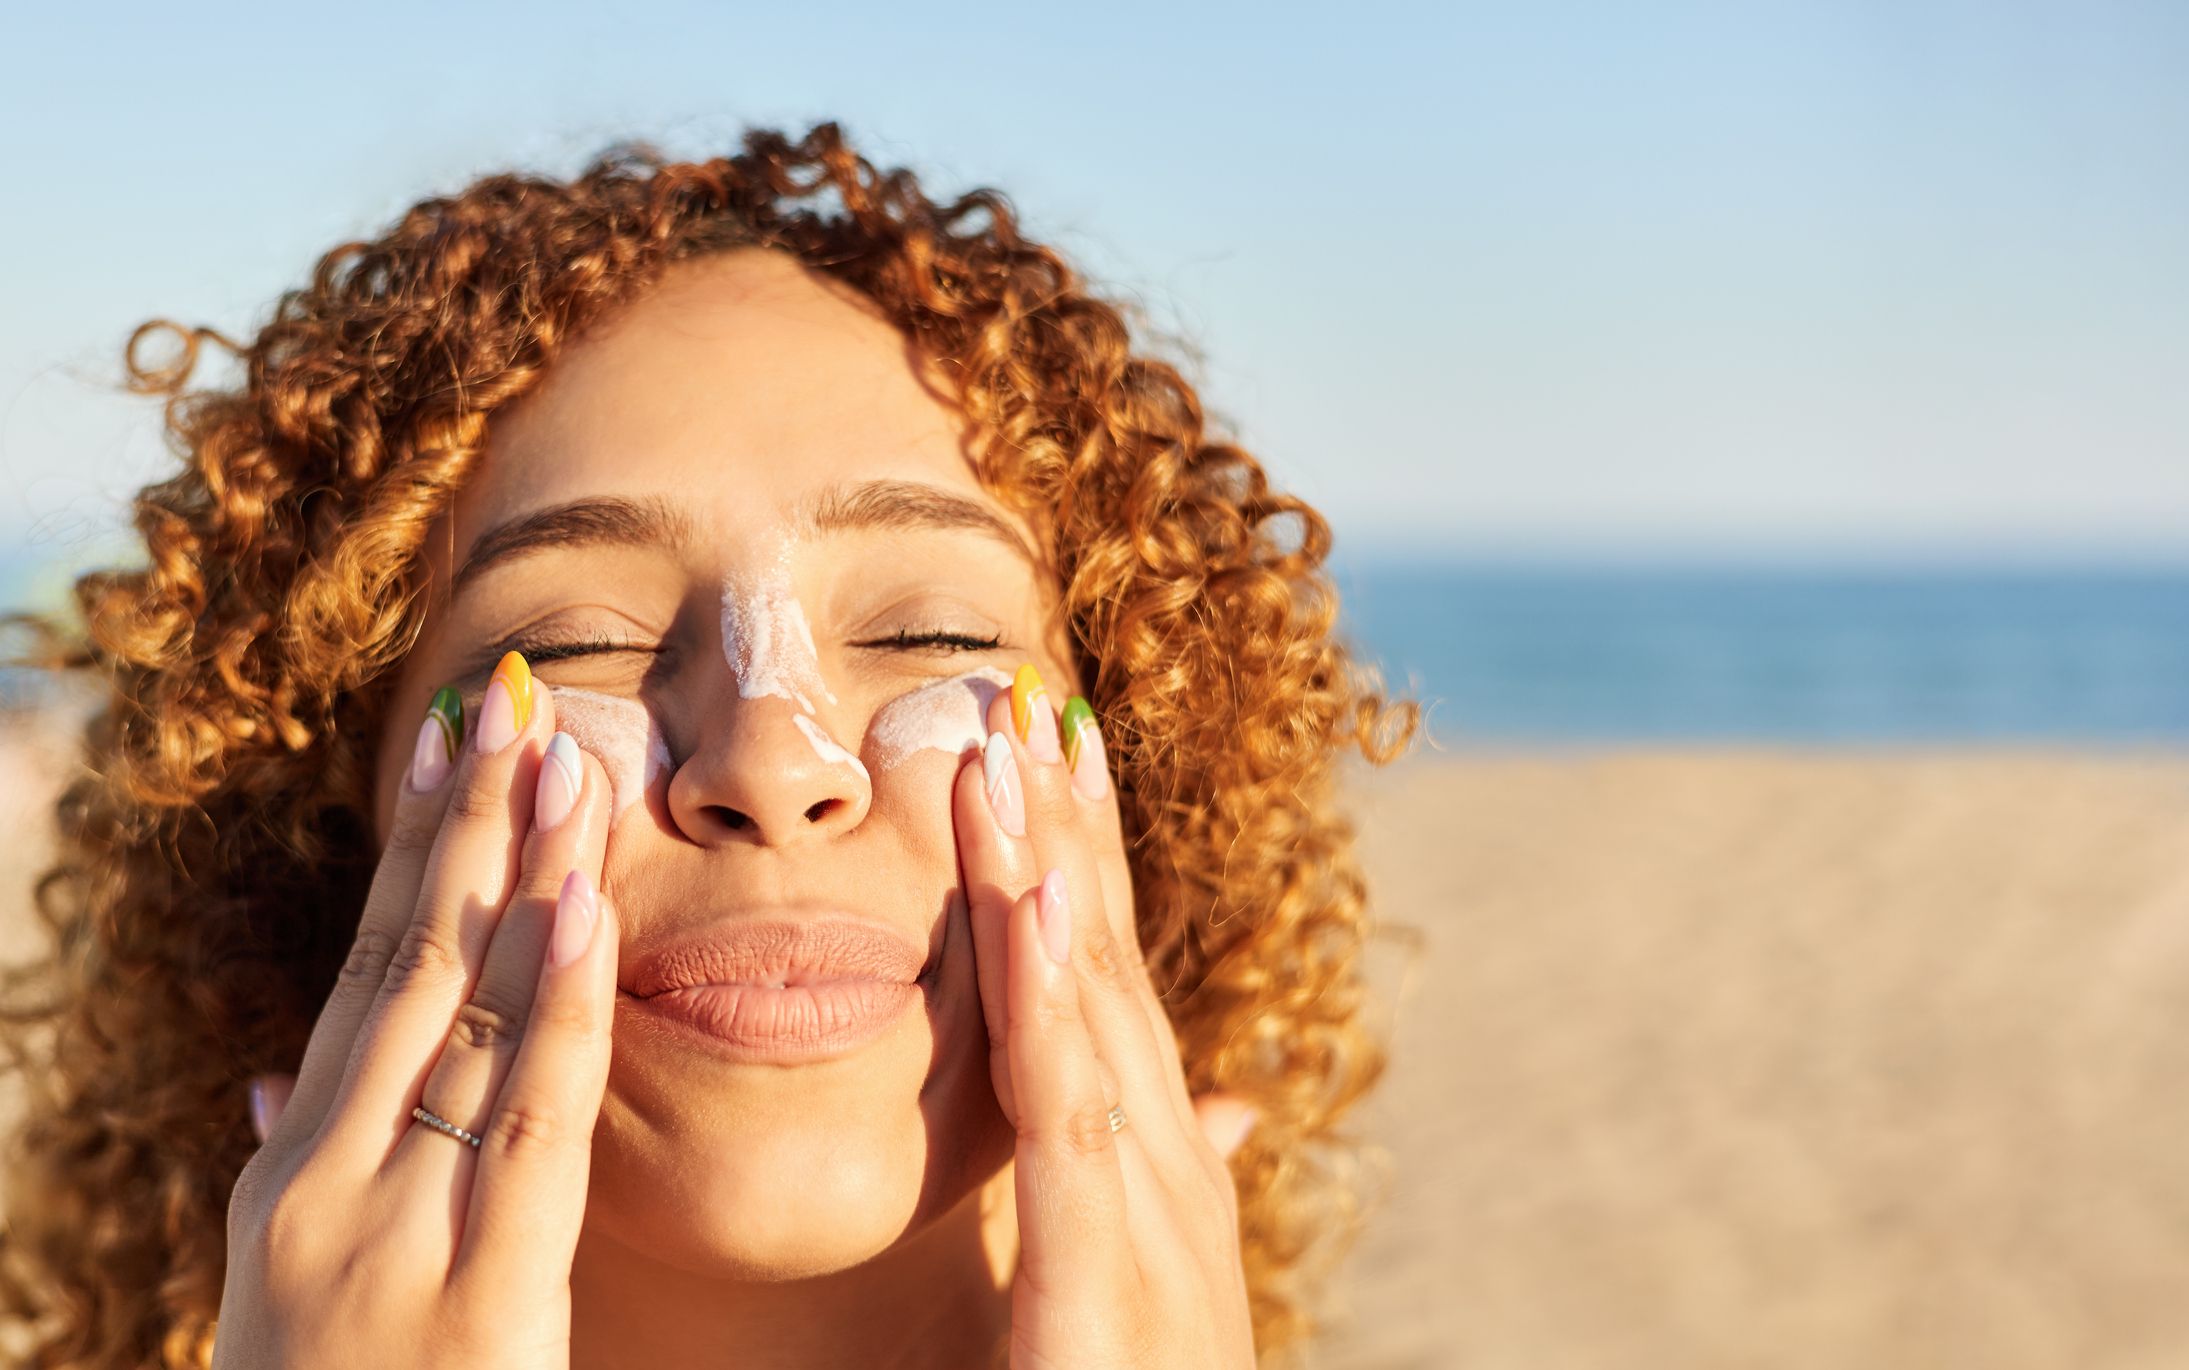 Boost your sun protection with these tips